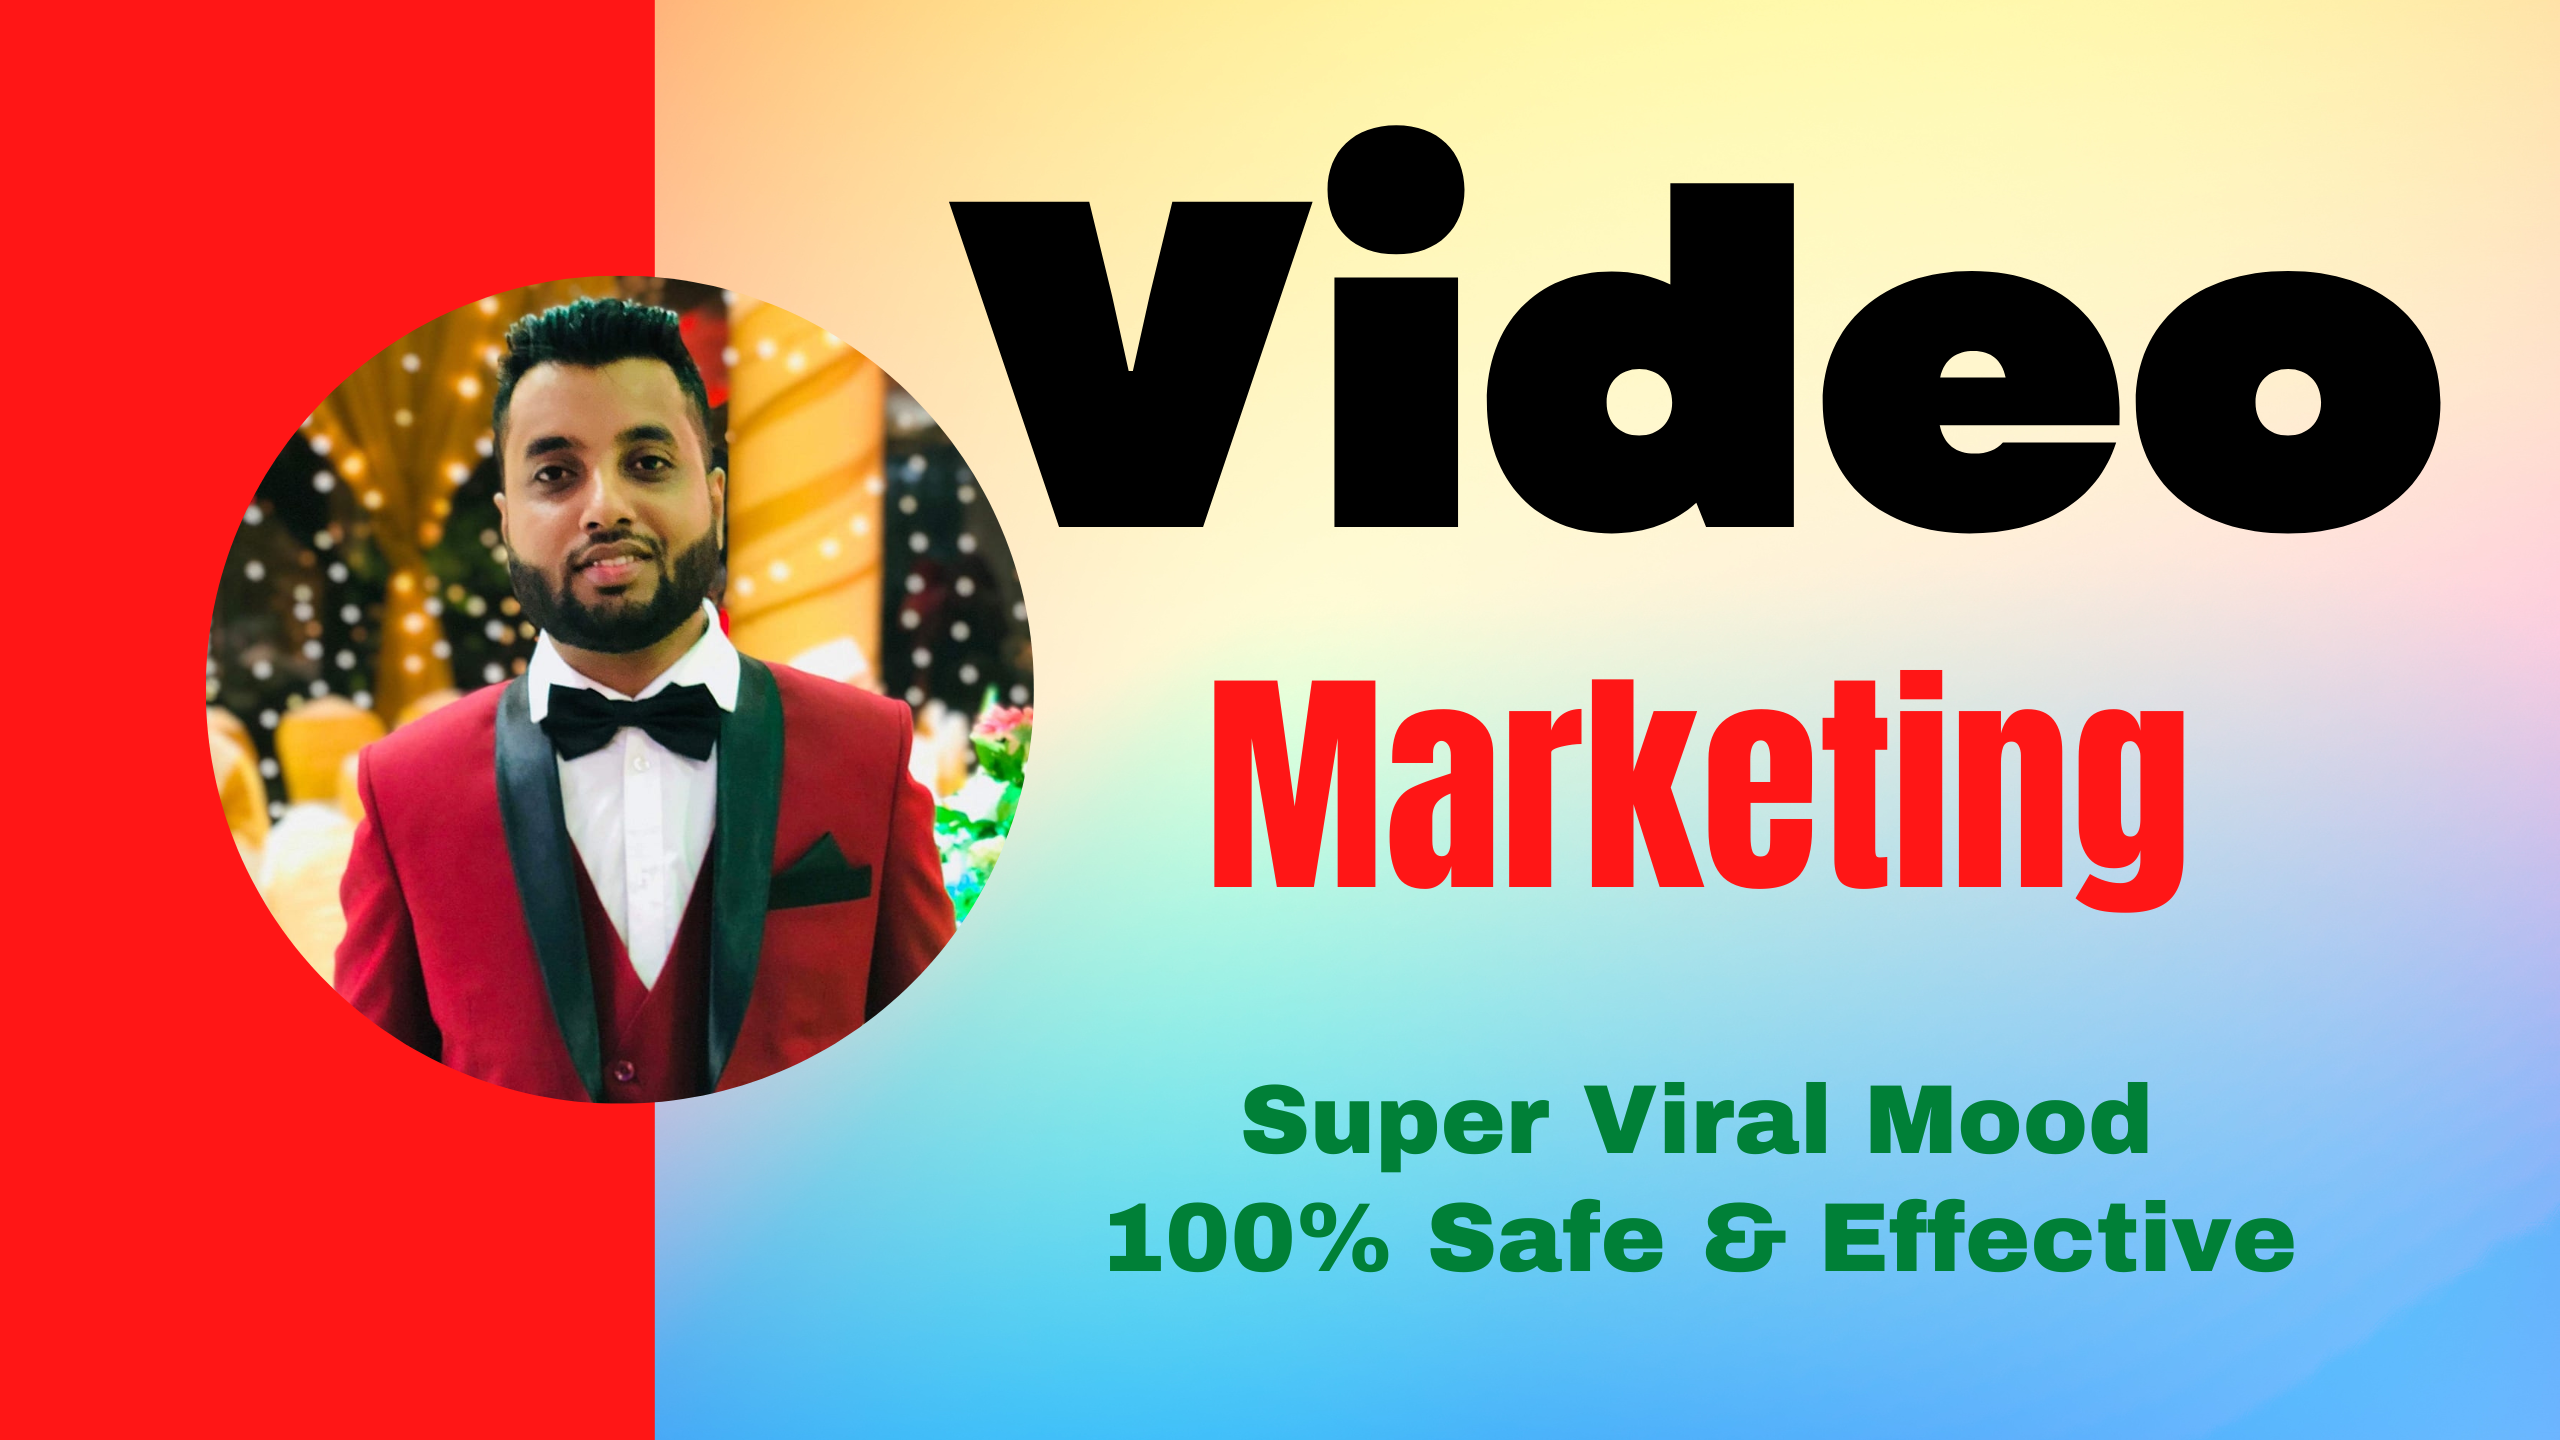 Professional Video Promotion Service to Boost Your Online Presence